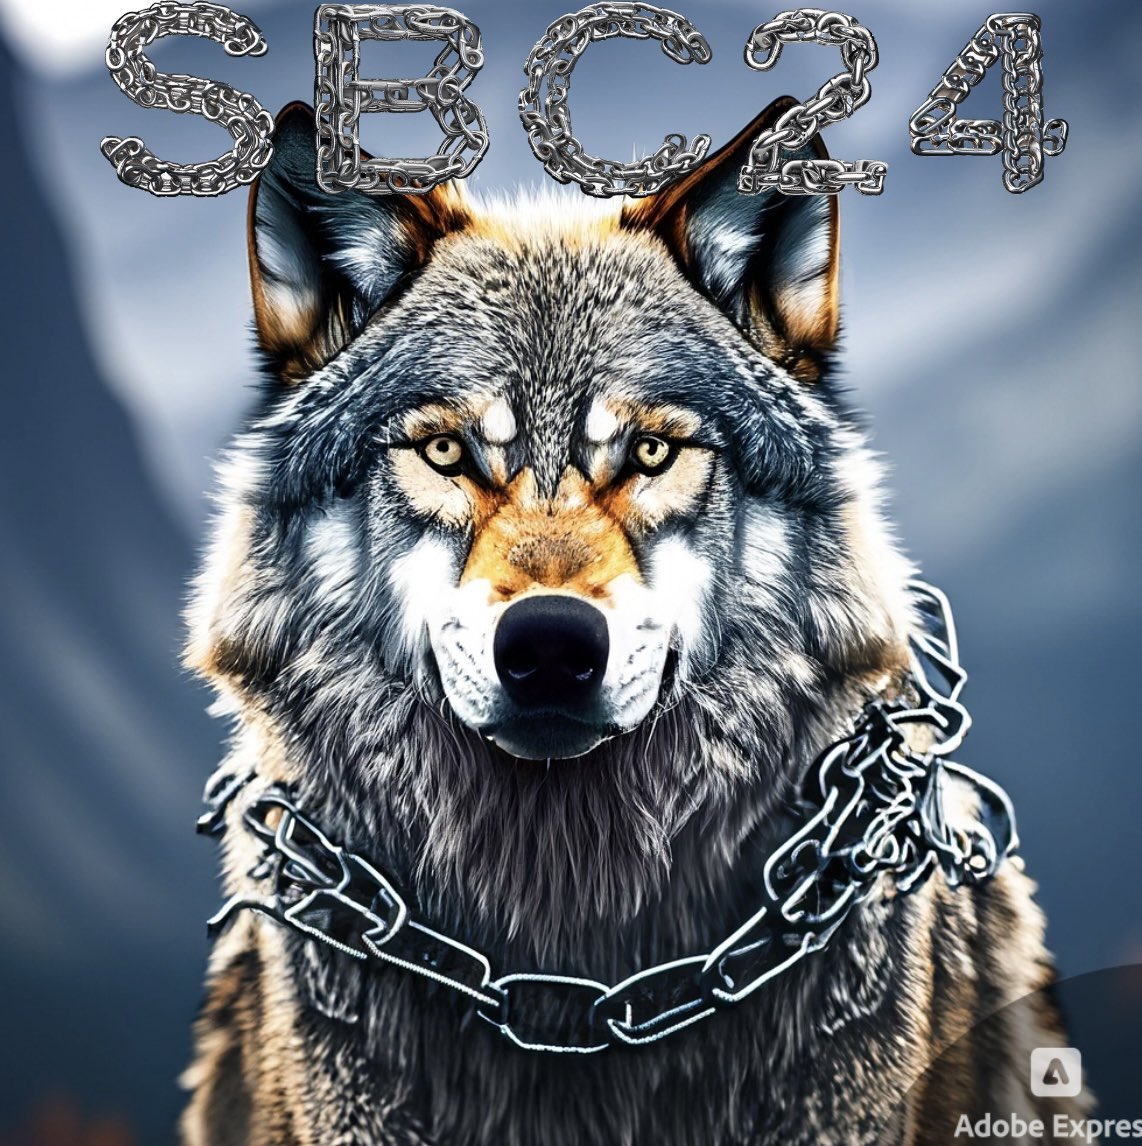 CHAIN UP WOLVES! 🔥💯 IYKYK 💯🤯 the wolves are ready to RUN AND RULE AGAIN 🐺🐺 #SBC24 is here to conquer AND THE WOLVES WILL MAKE SURE OF IT the world will know who we are… 🌎 WE ARE #STC WE ARE #SaitaChain THE NEWEST BEST LAYER 0 #BlockChain … AND I HAVE NO DOUBT IN OUR